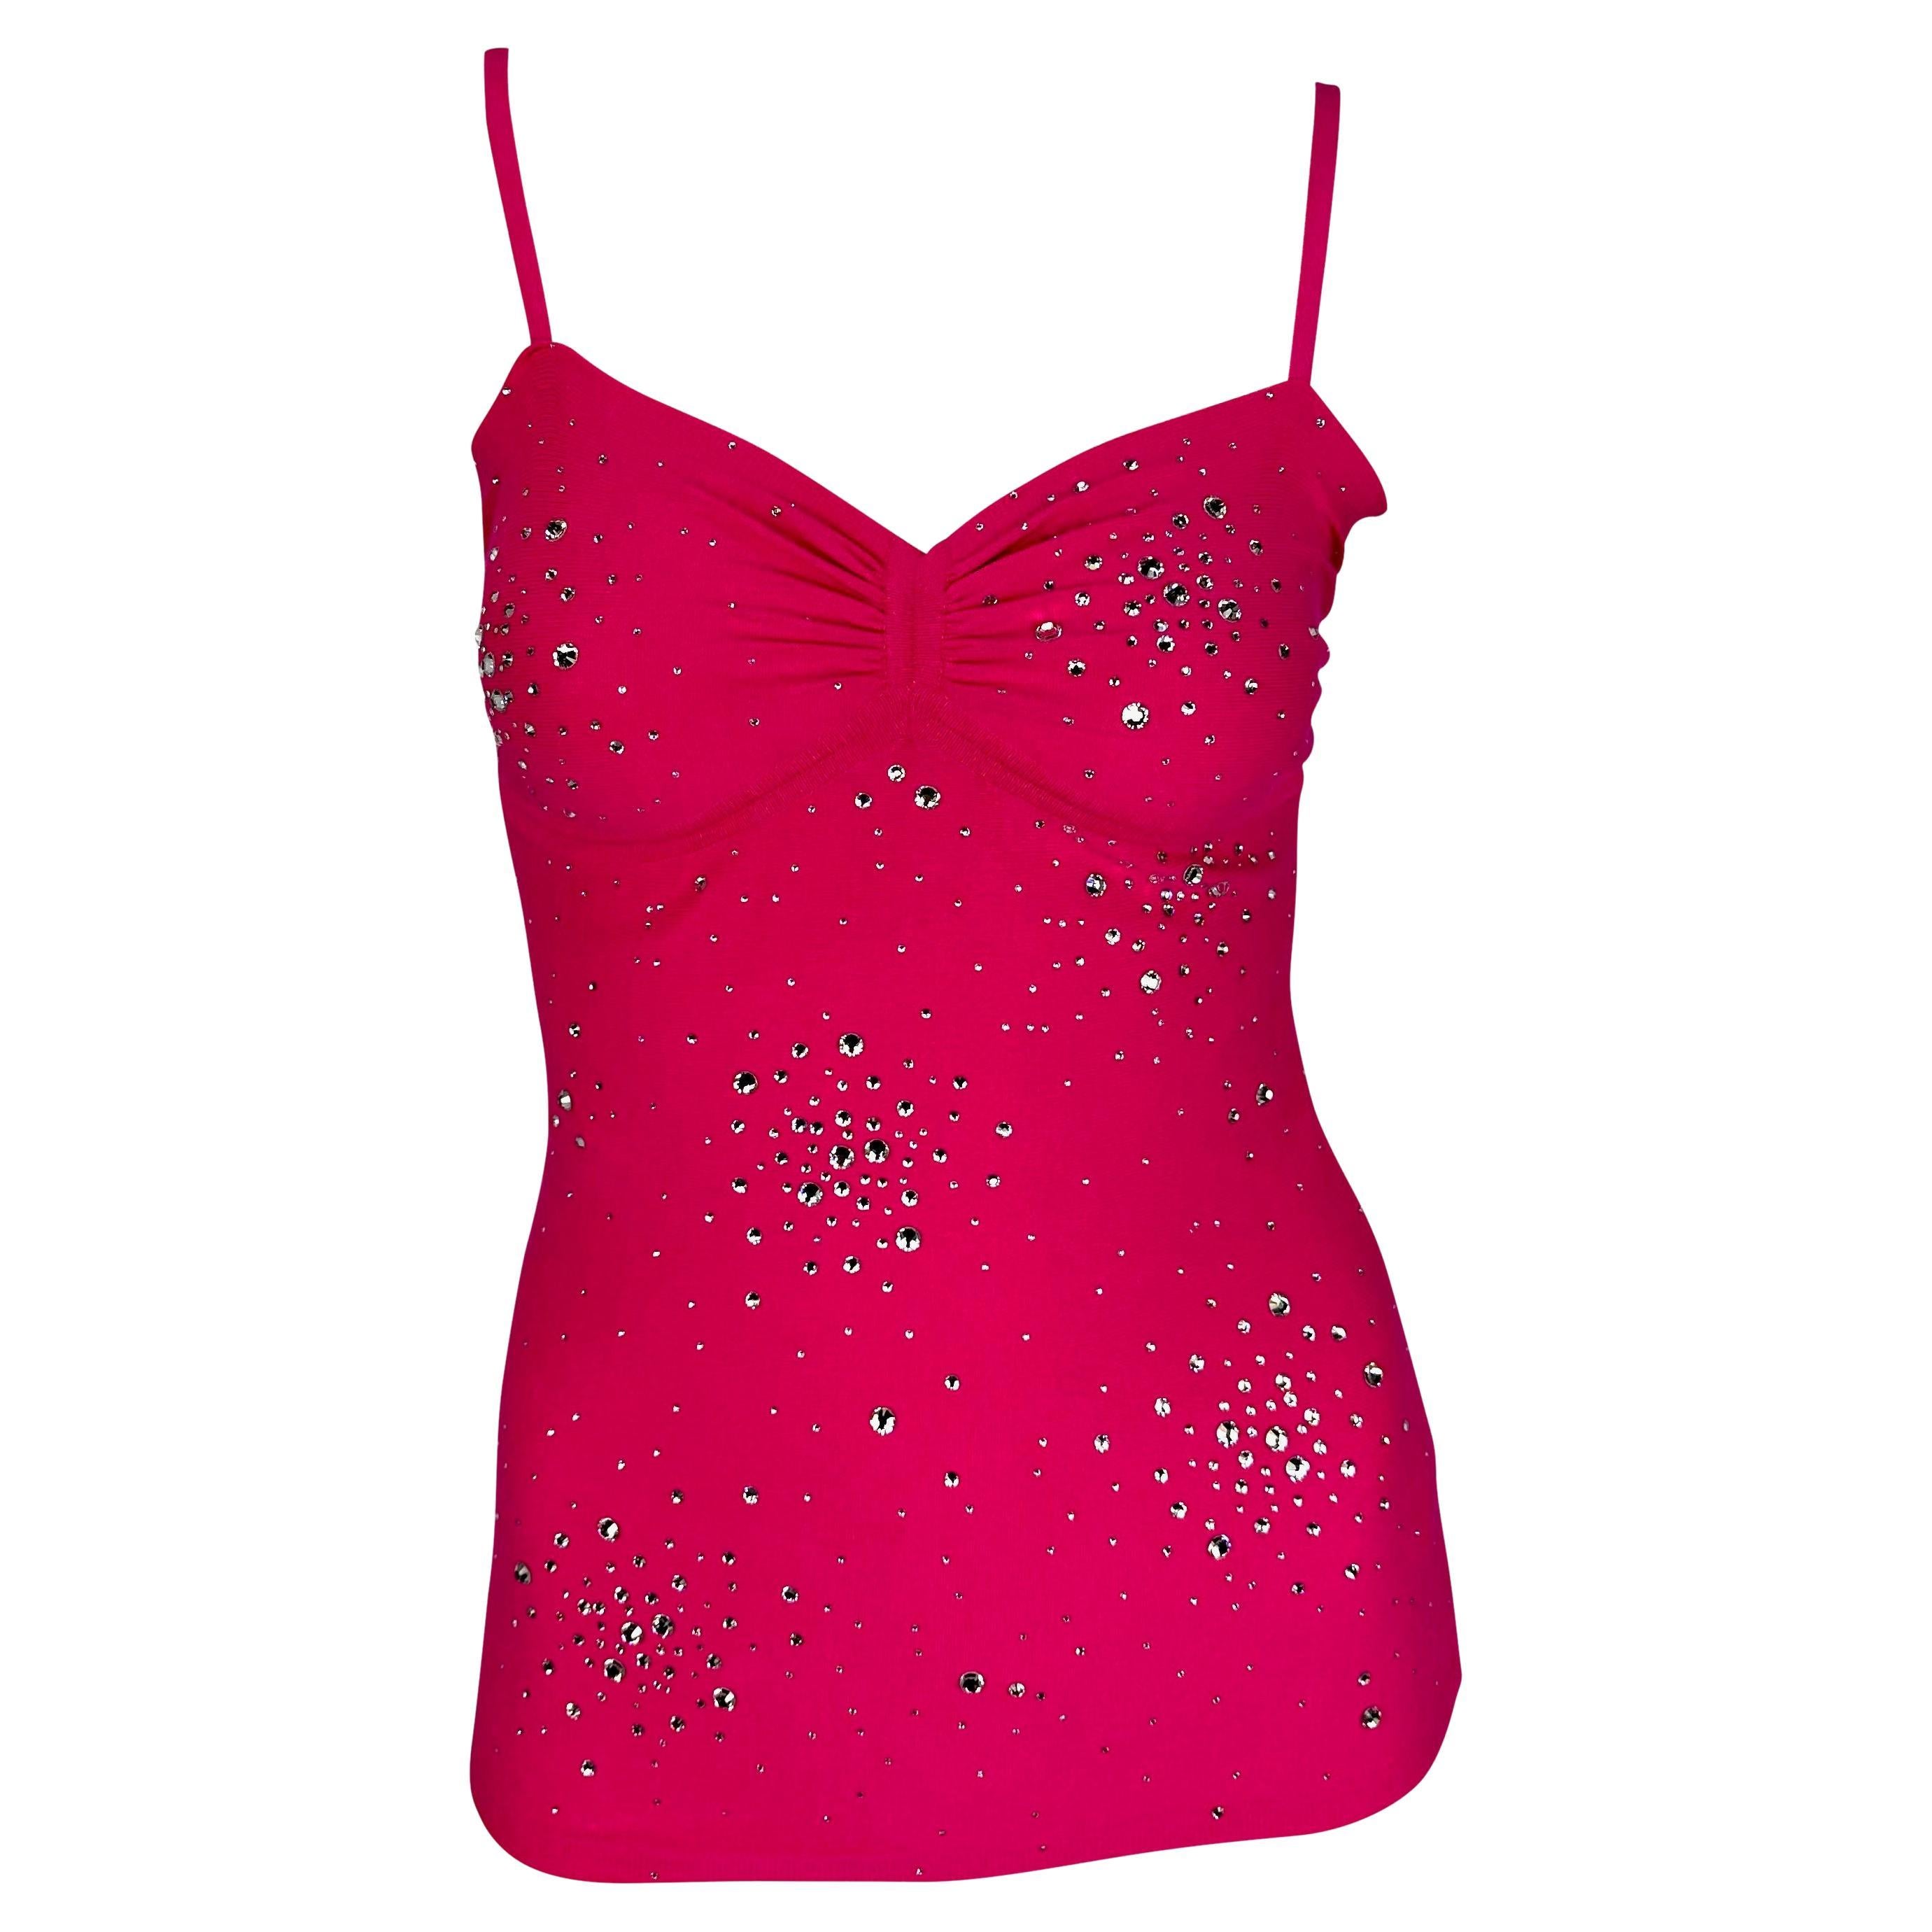 S/S 2004 Versace by Donatella Hot Pink Rhinestone Stretch Knit Tank Top  For Sale